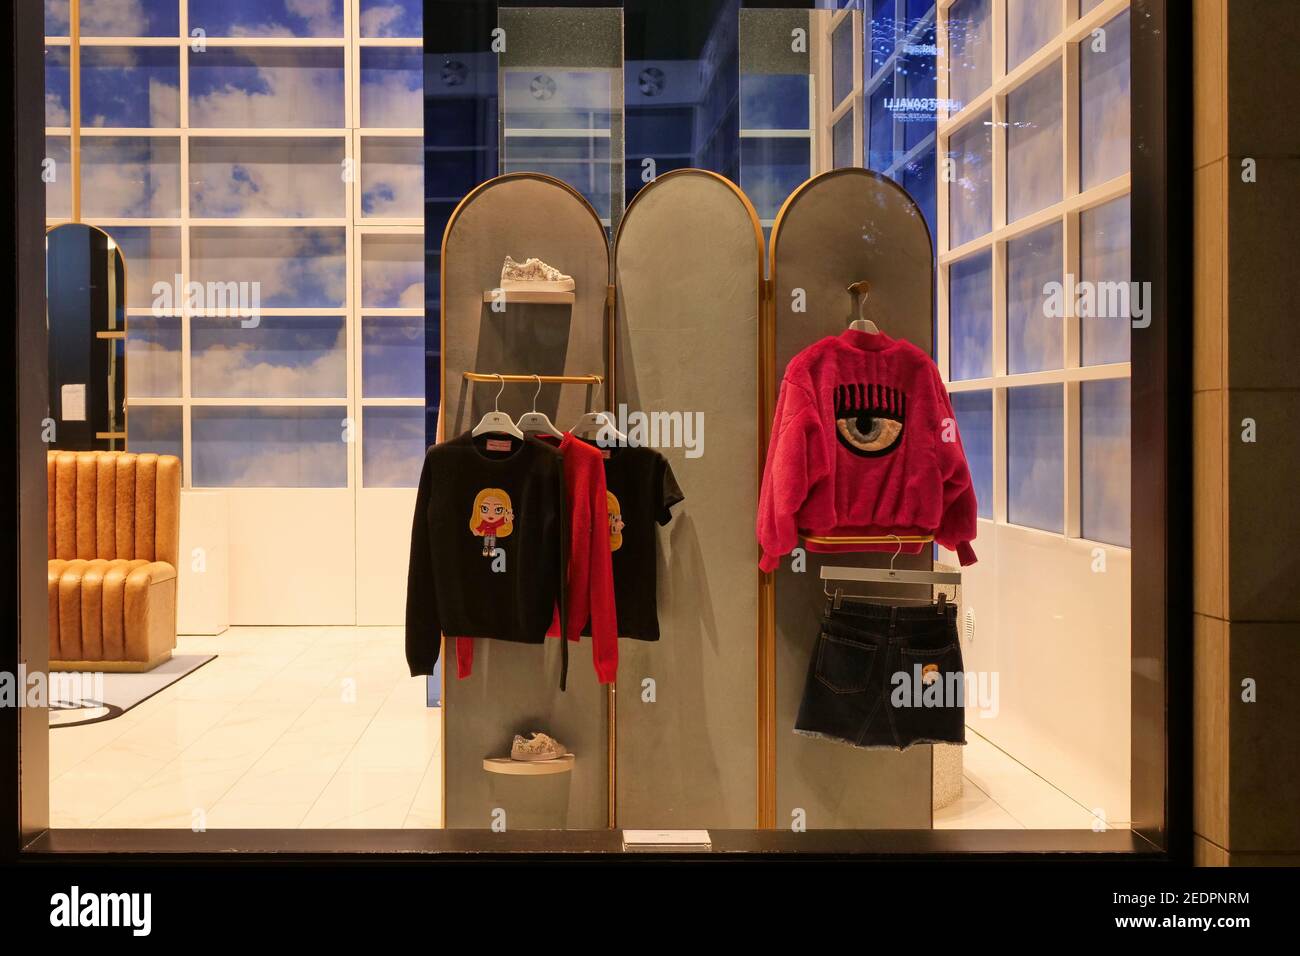 Chiara Ferragni official store in modern district of Milan, Lombardy, Italy  Stock Photo - Alamy